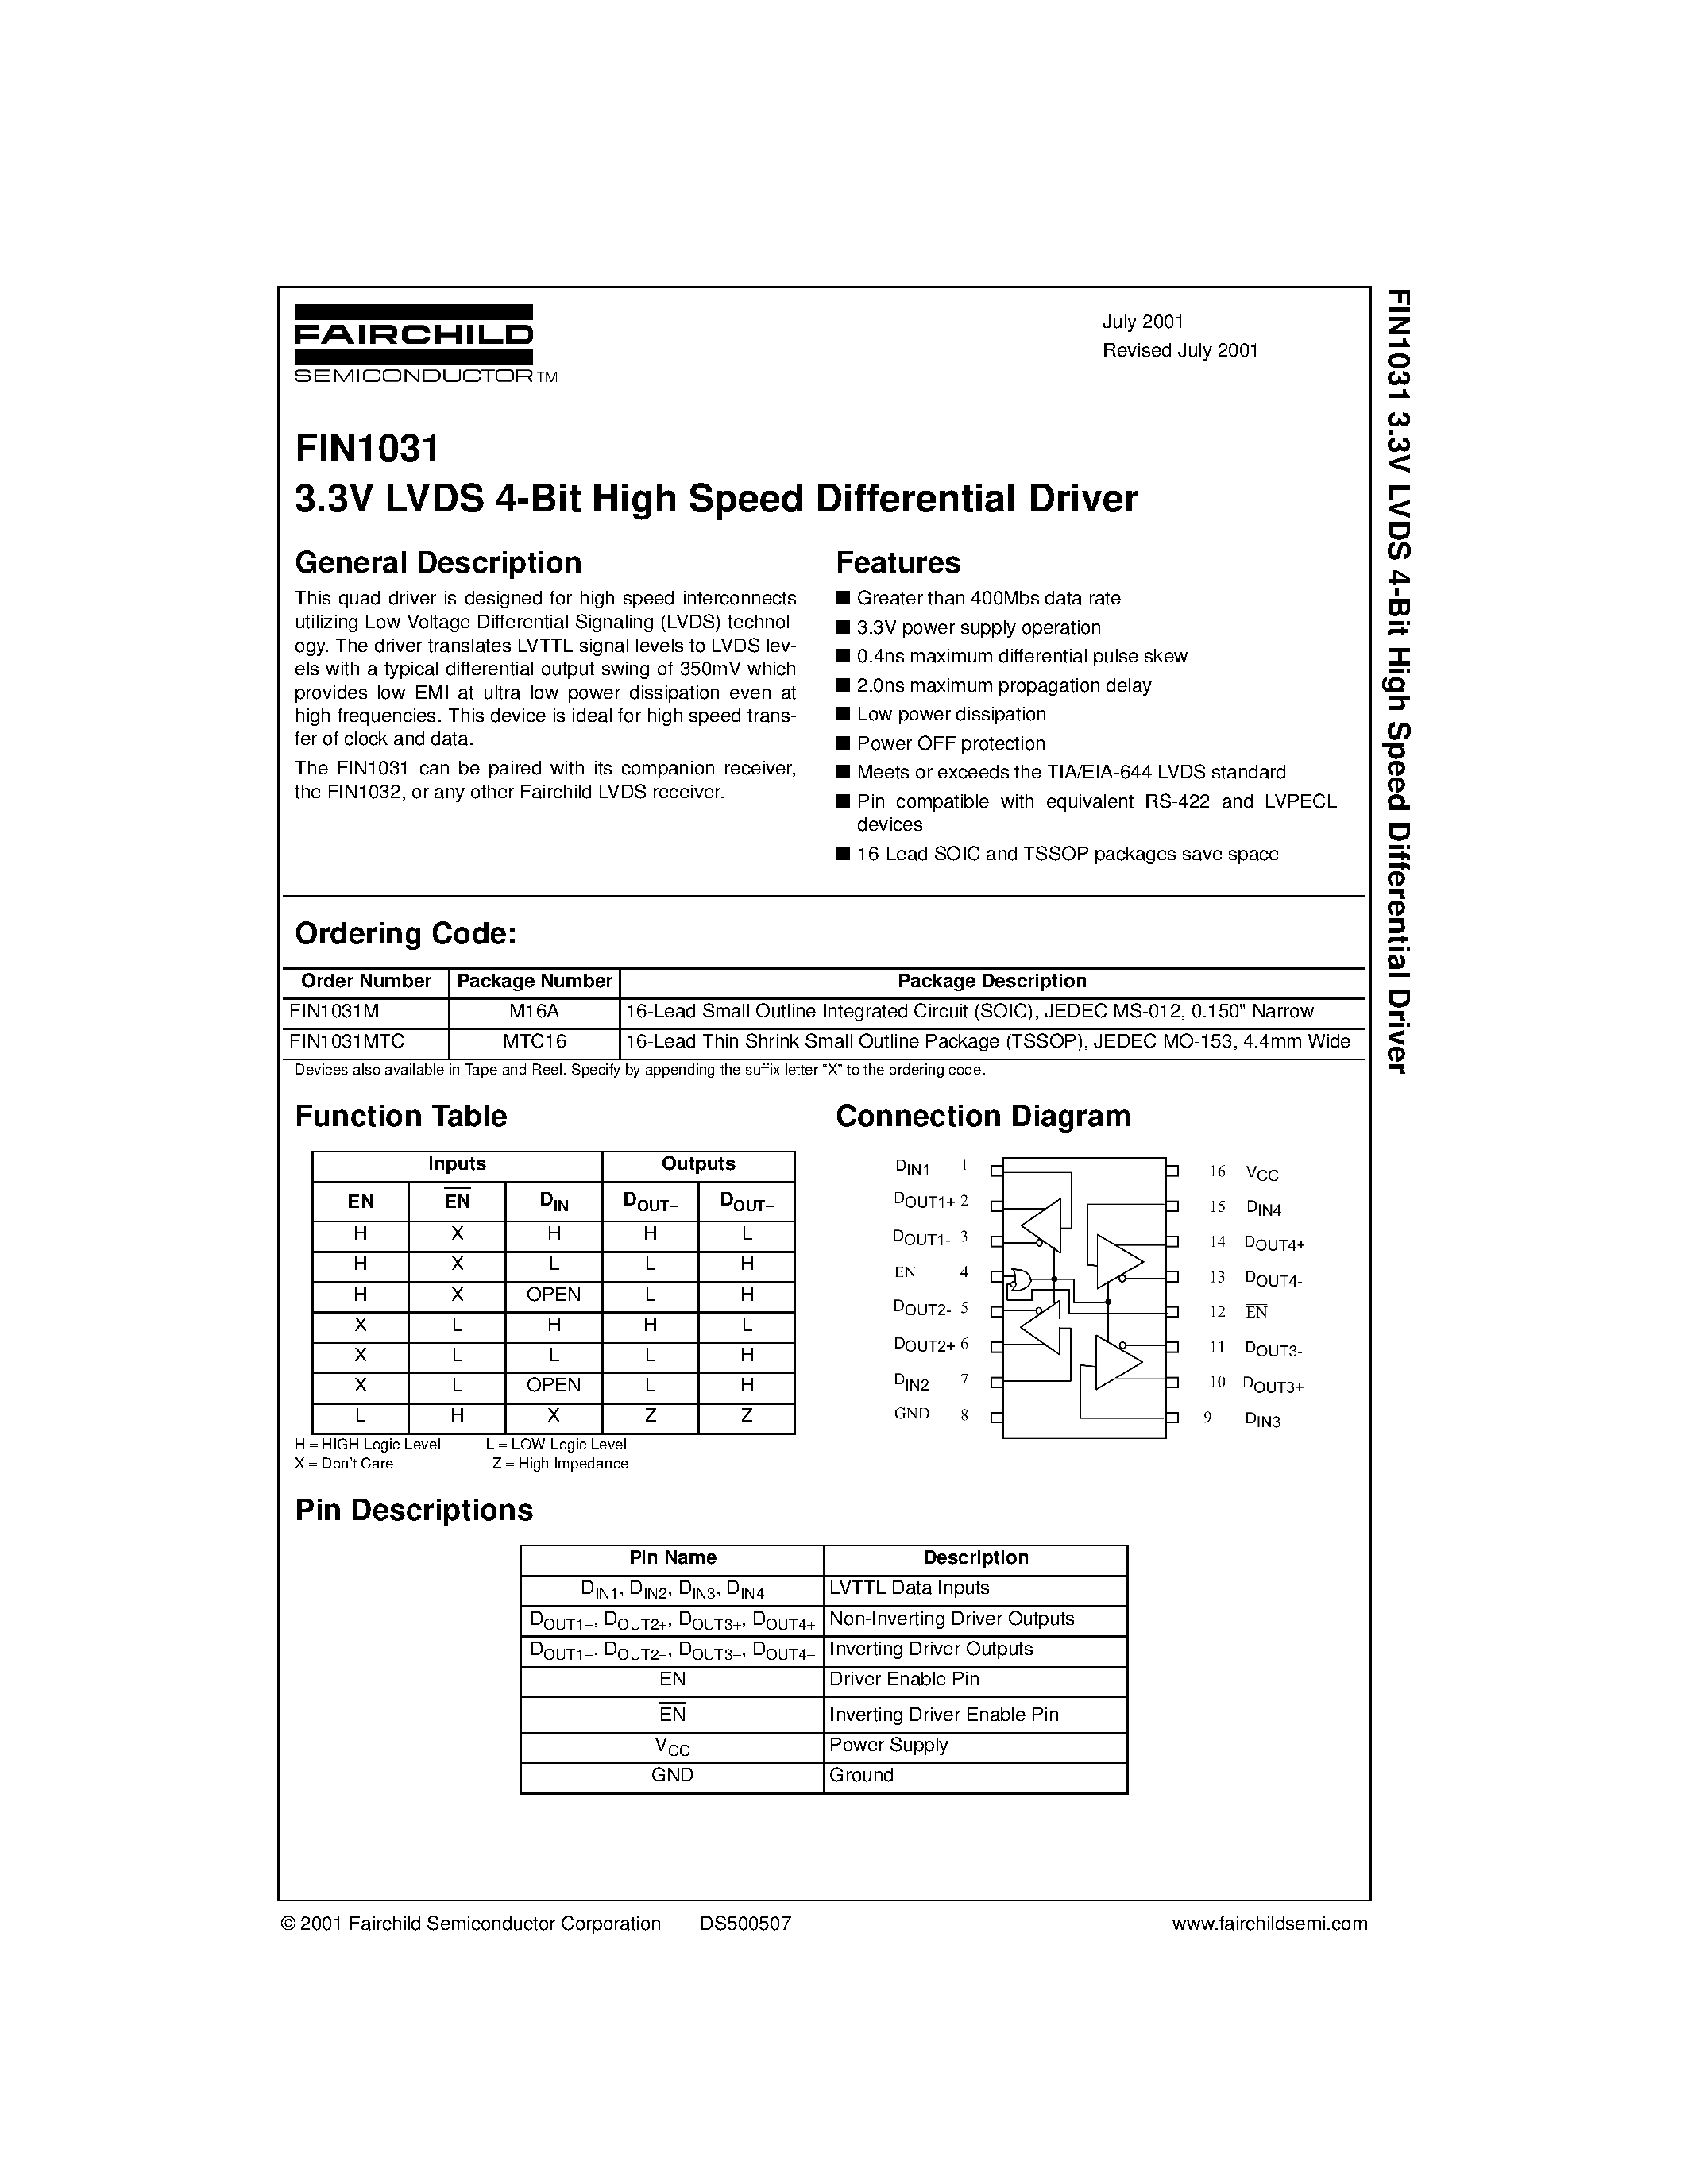 Datasheet FIN1031 - 3.3V LVDS 4-Bit High Speed Differential Driver page 1